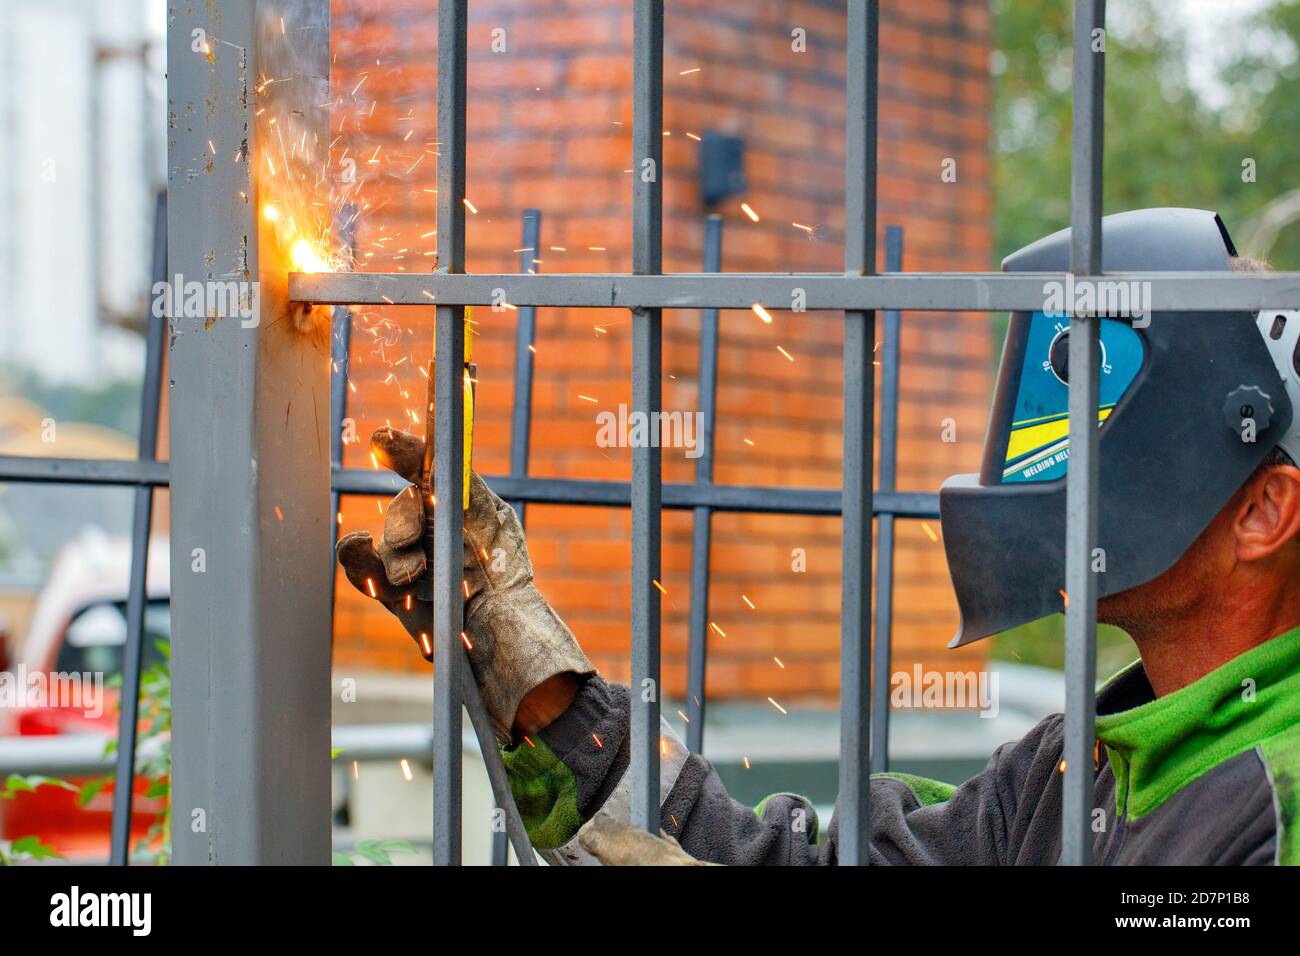 A welder wearing a protective helmet and gloves is welding a metal fence around an apartment building. Stock Photo